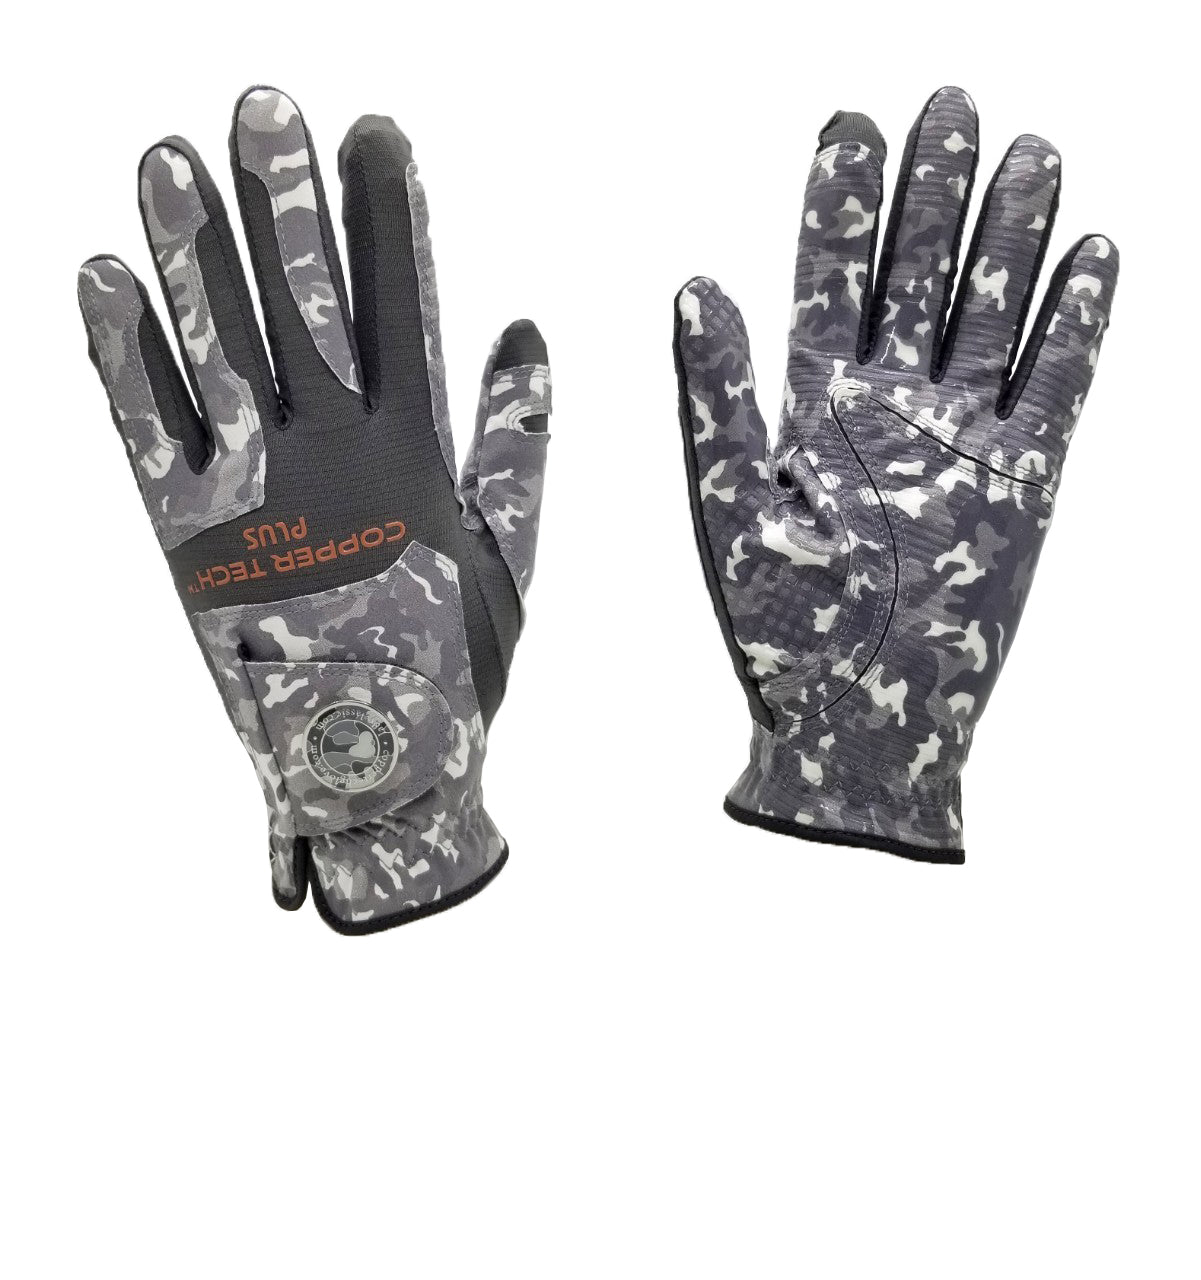 Copper Tech Plus Women Camo Theme Patriotic Golf Gloves Worn on Right Hand For Left Handed